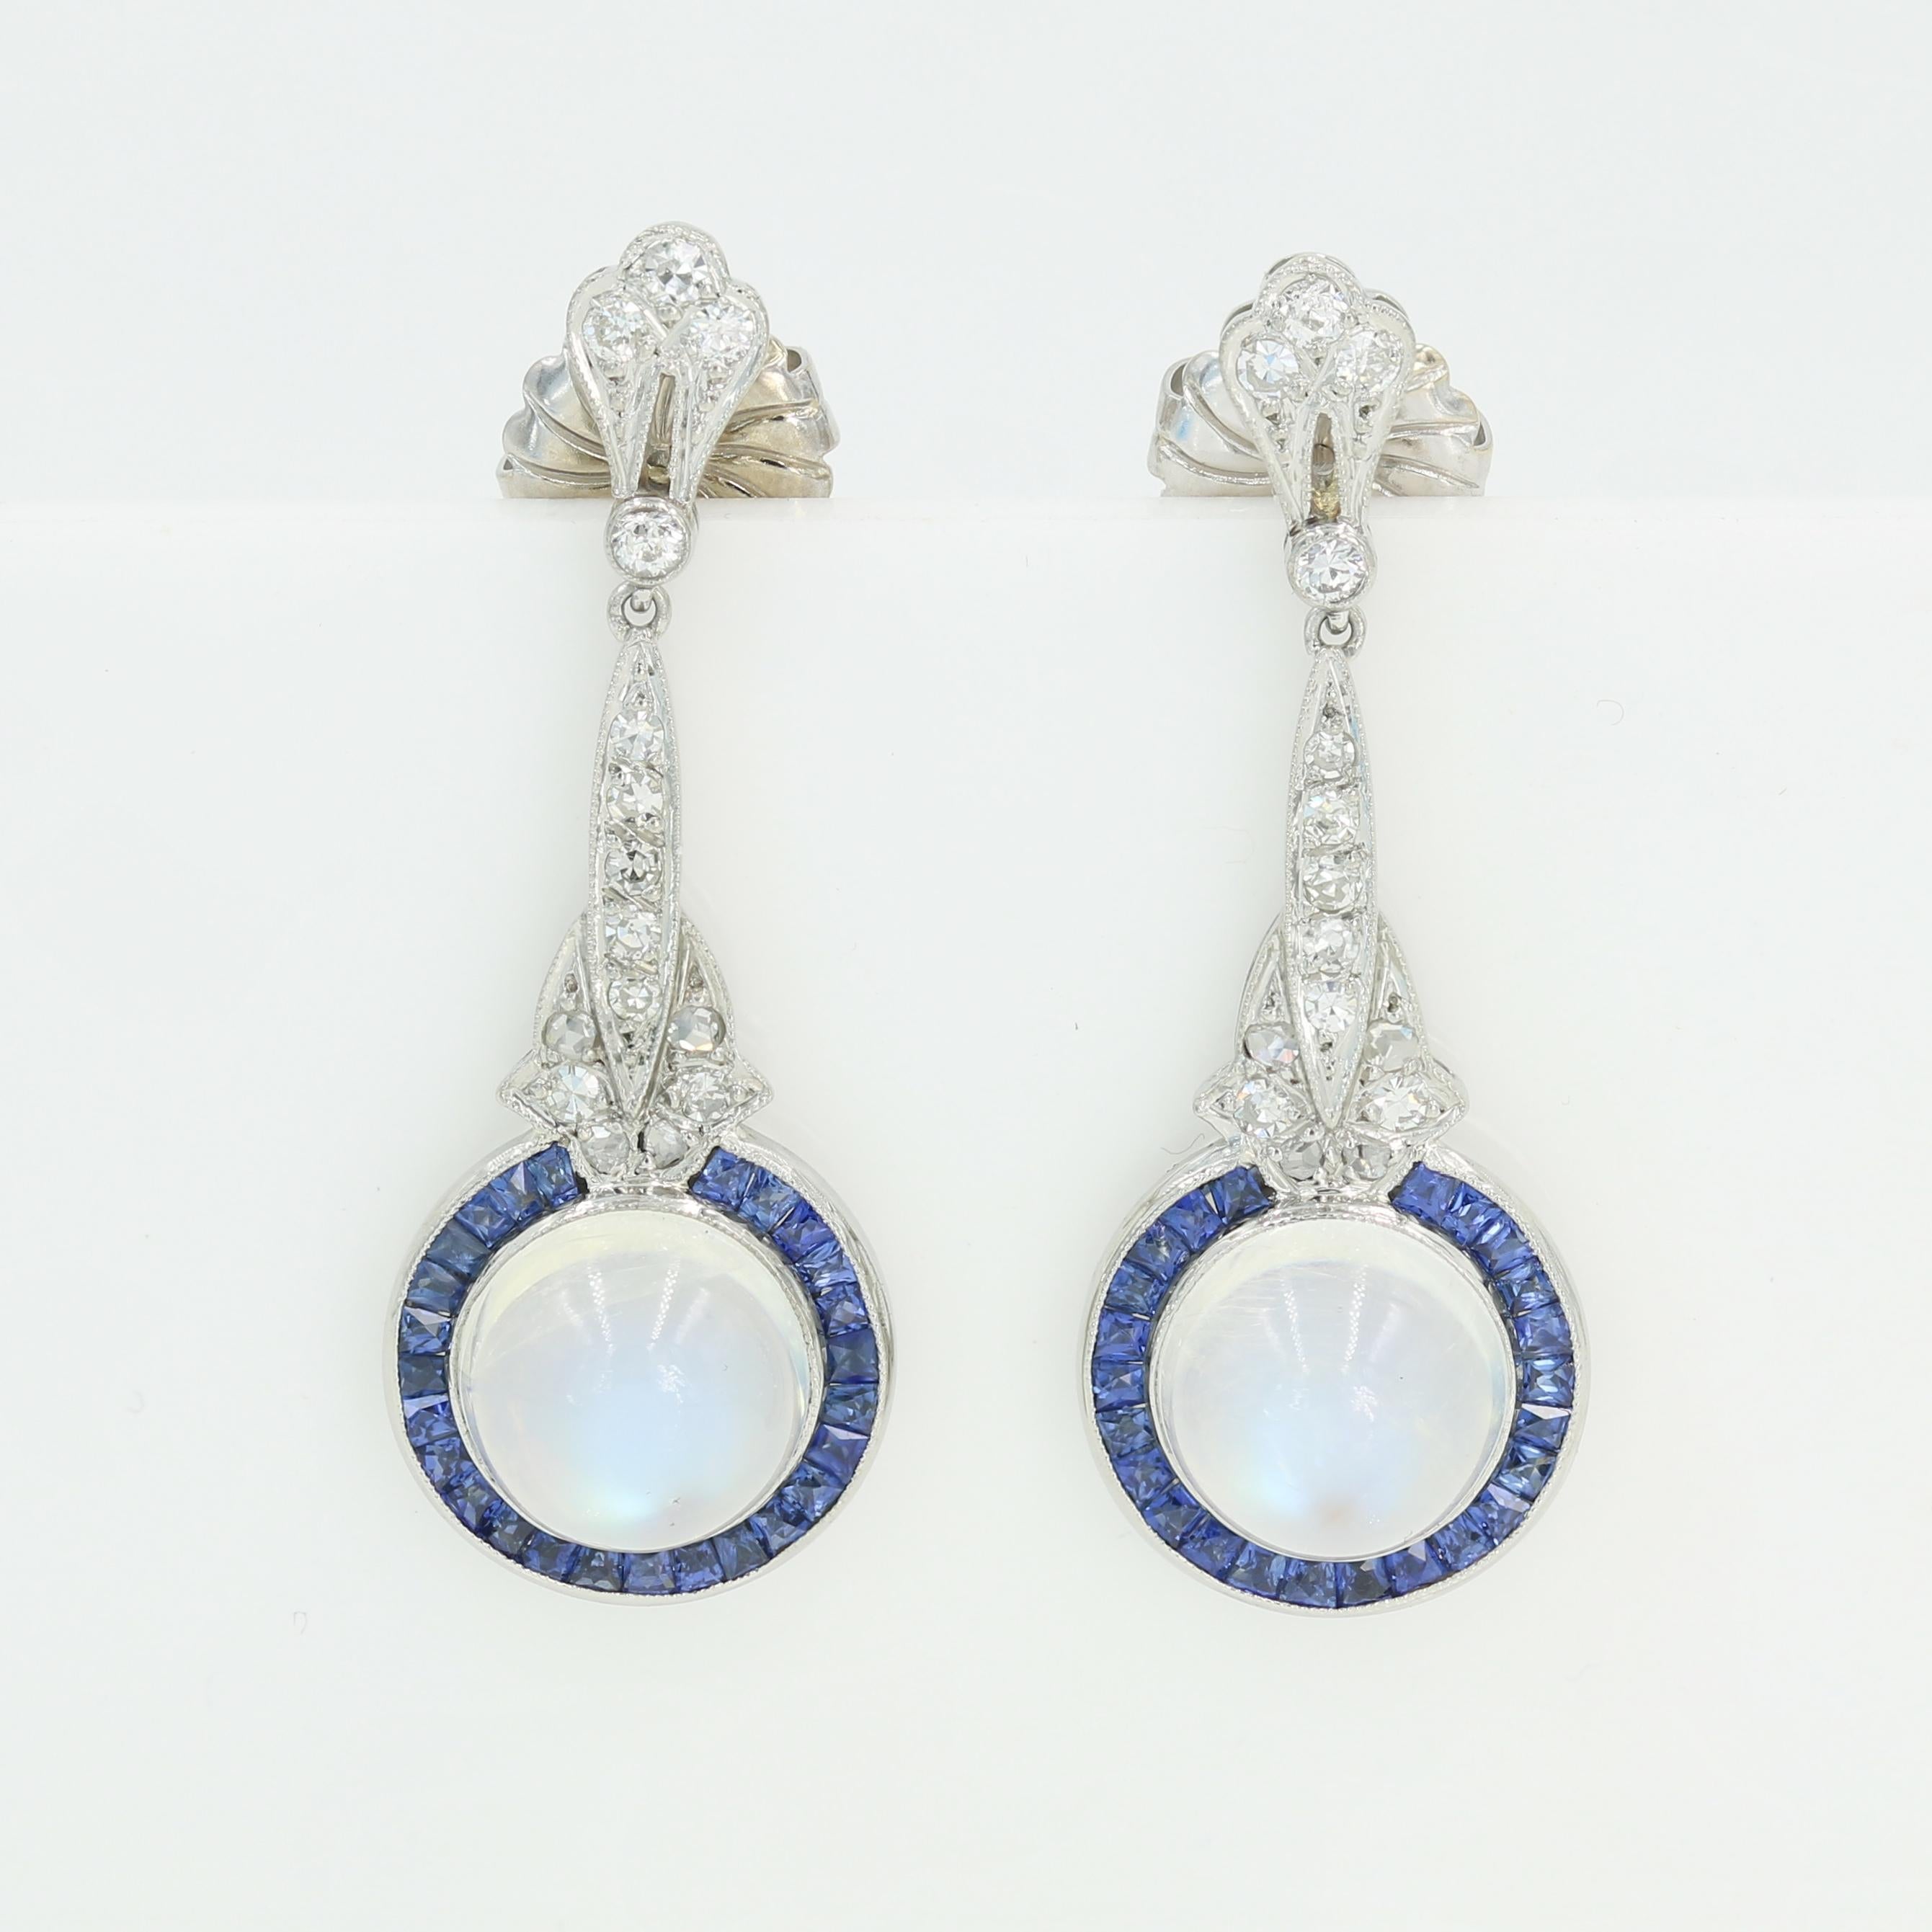 Gorgeous Art Deco Moonstone, Diamond and Sapphire drop earrings with 10.07cts. total weight matched natural Moonstones.  Old and single cut diamonds weighing approximately 0.60ct. total of H/I color and VS/SI clarity.  50 Square cut sapphires